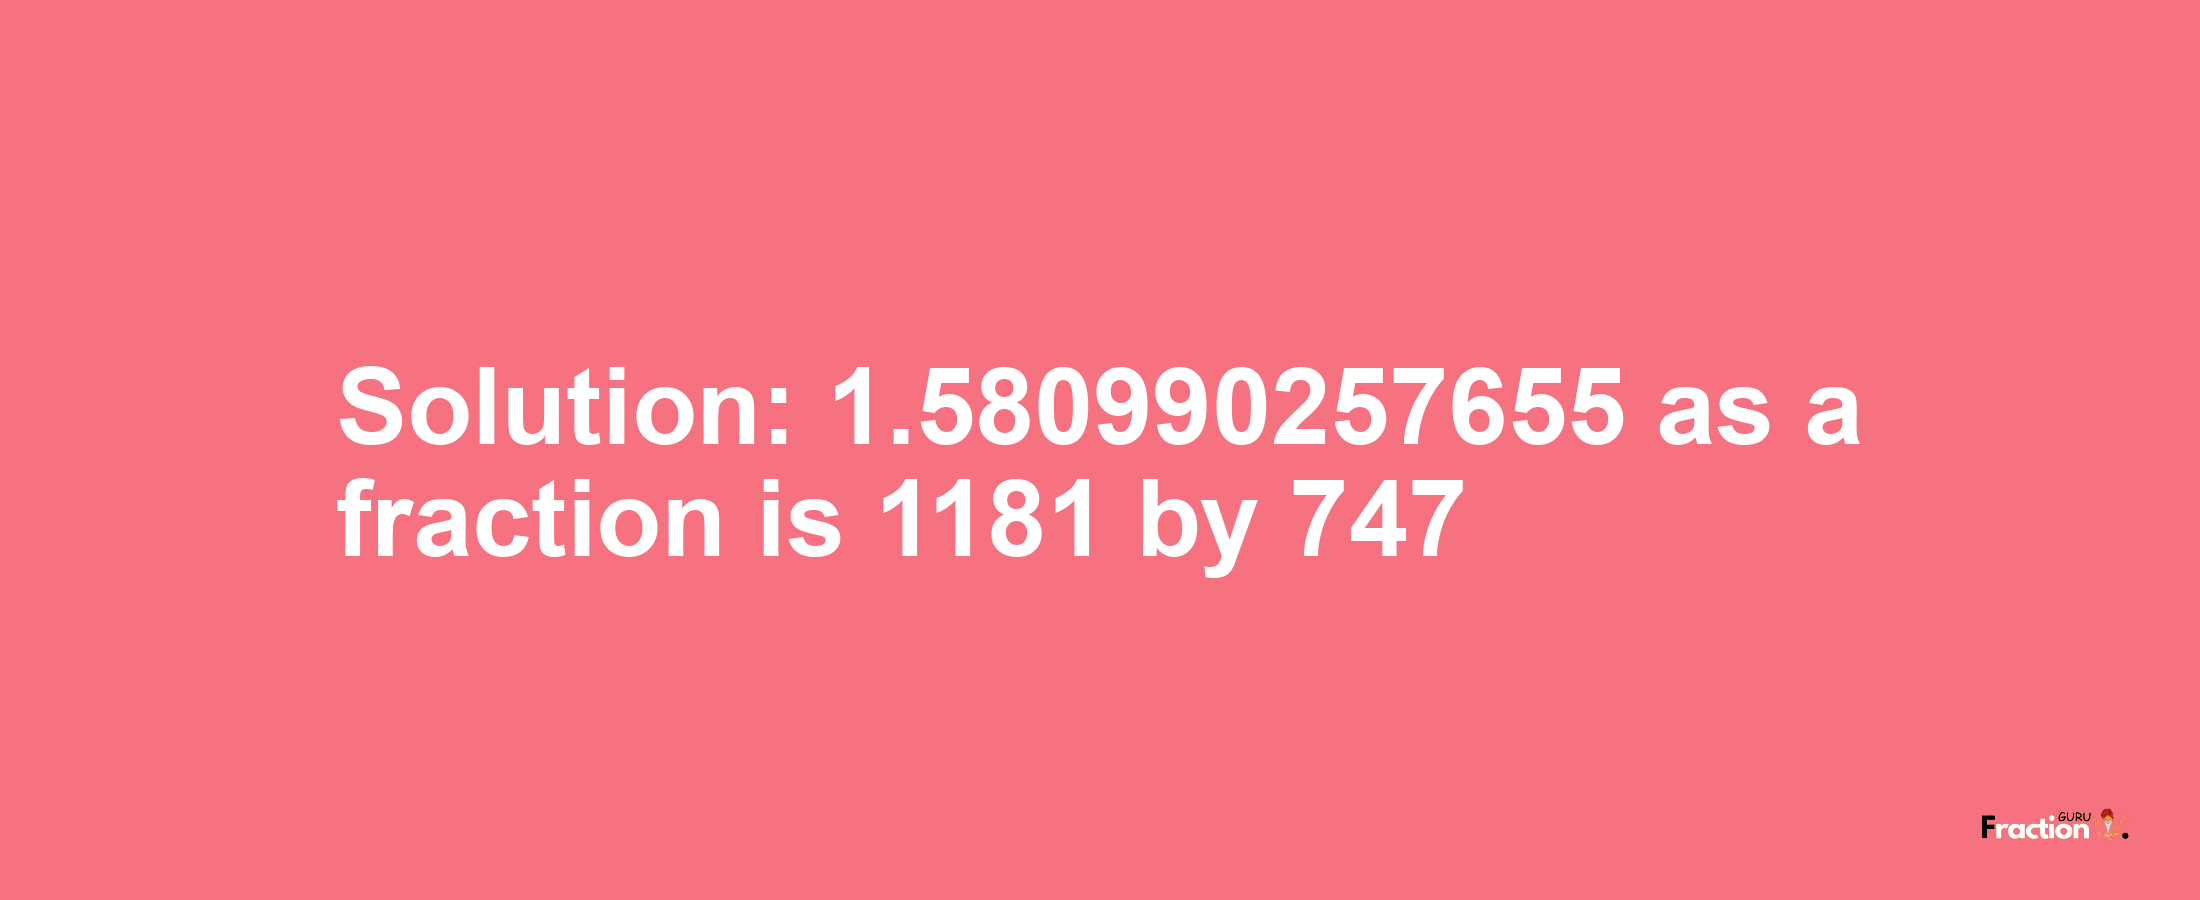 Solution:1.580990257655 as a fraction is 1181/747